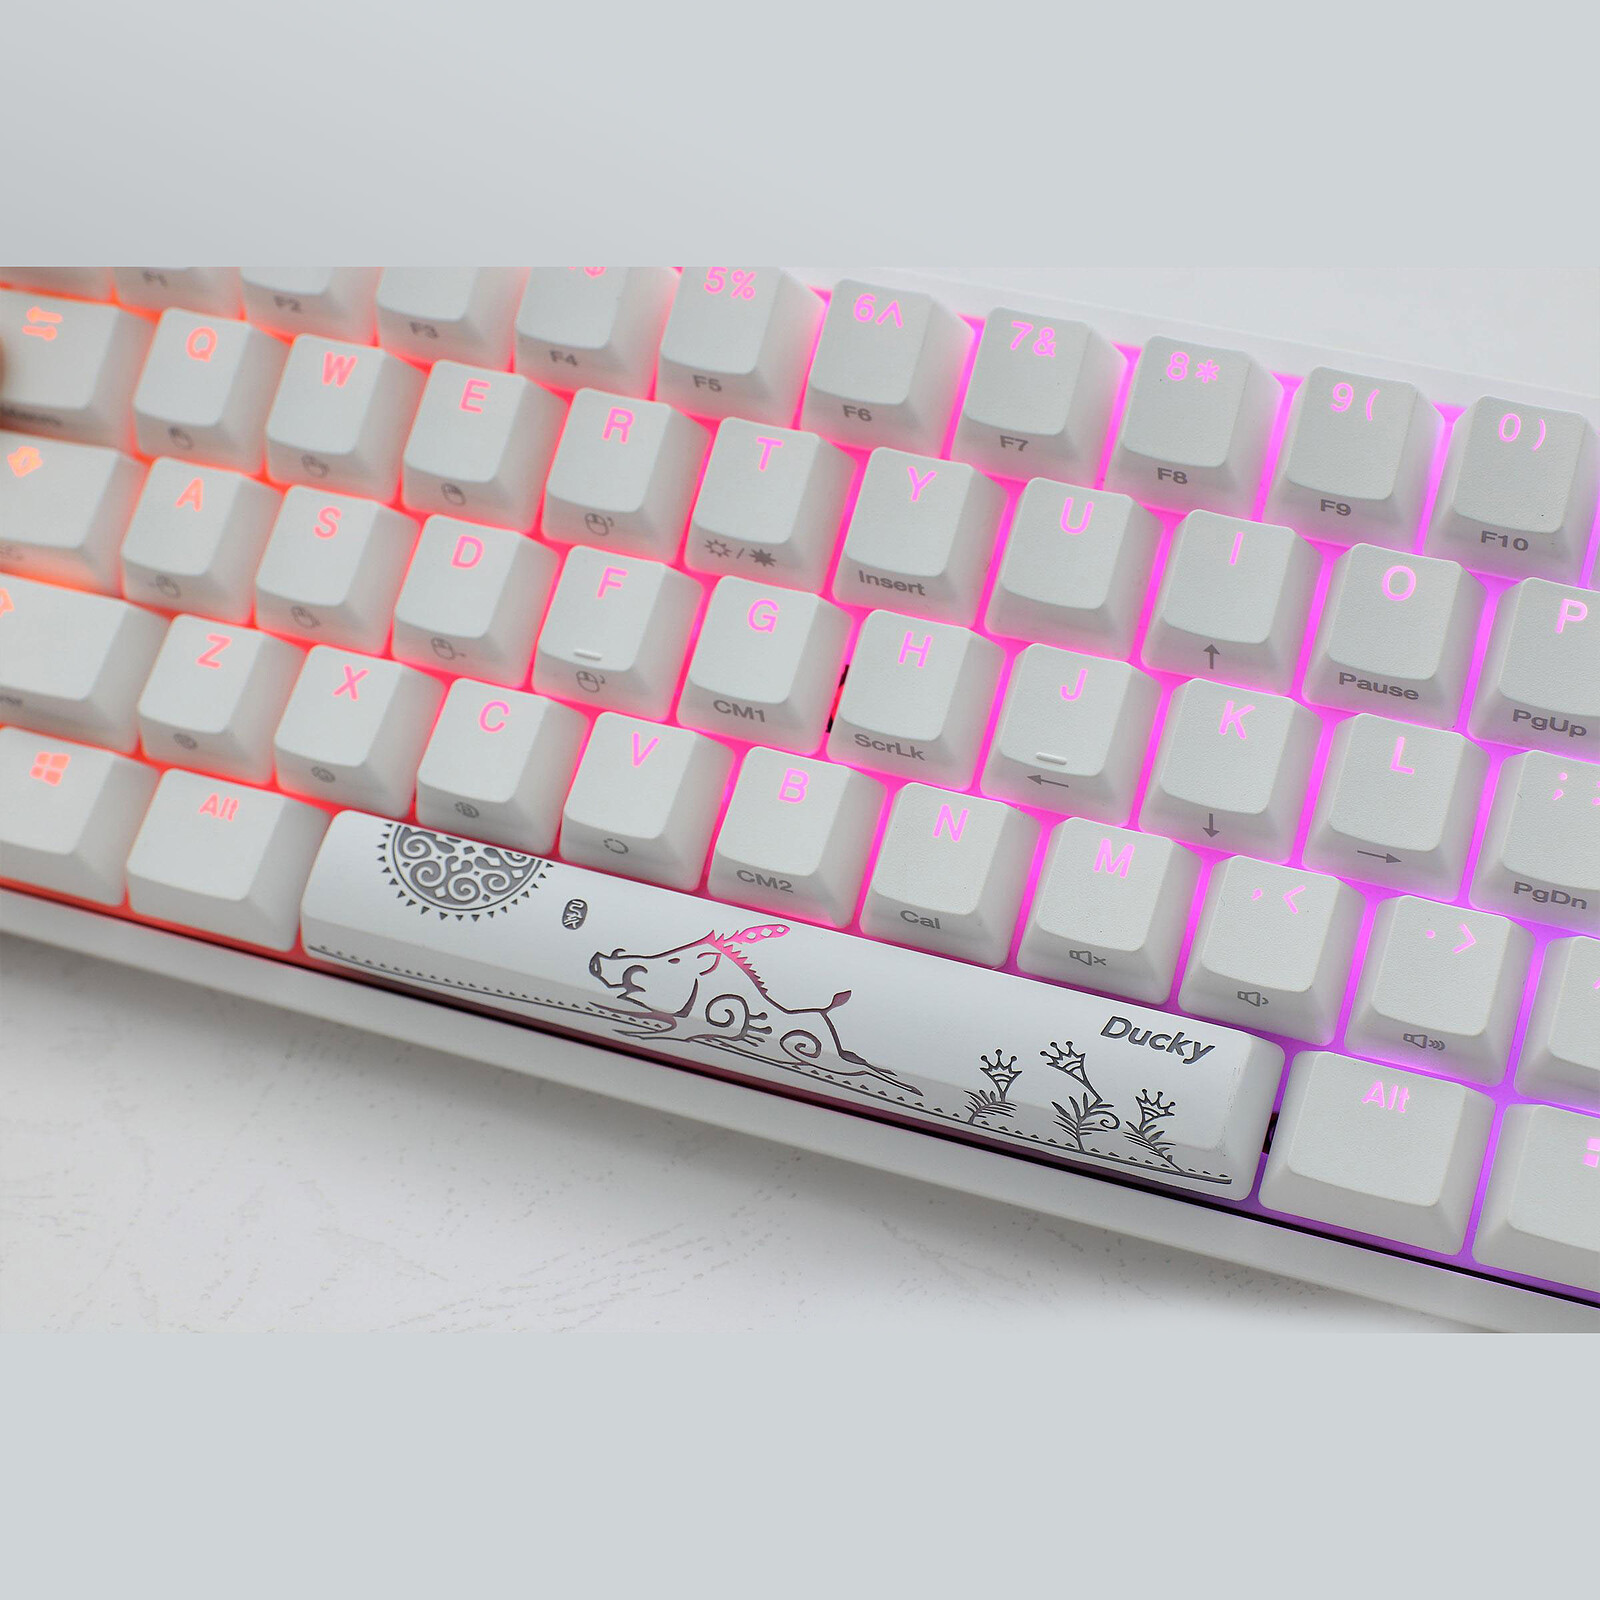 Ducky Channel One 2 Mini RGB White (Cherry MX Red) - Keyboard Ducky Channel on LDLC